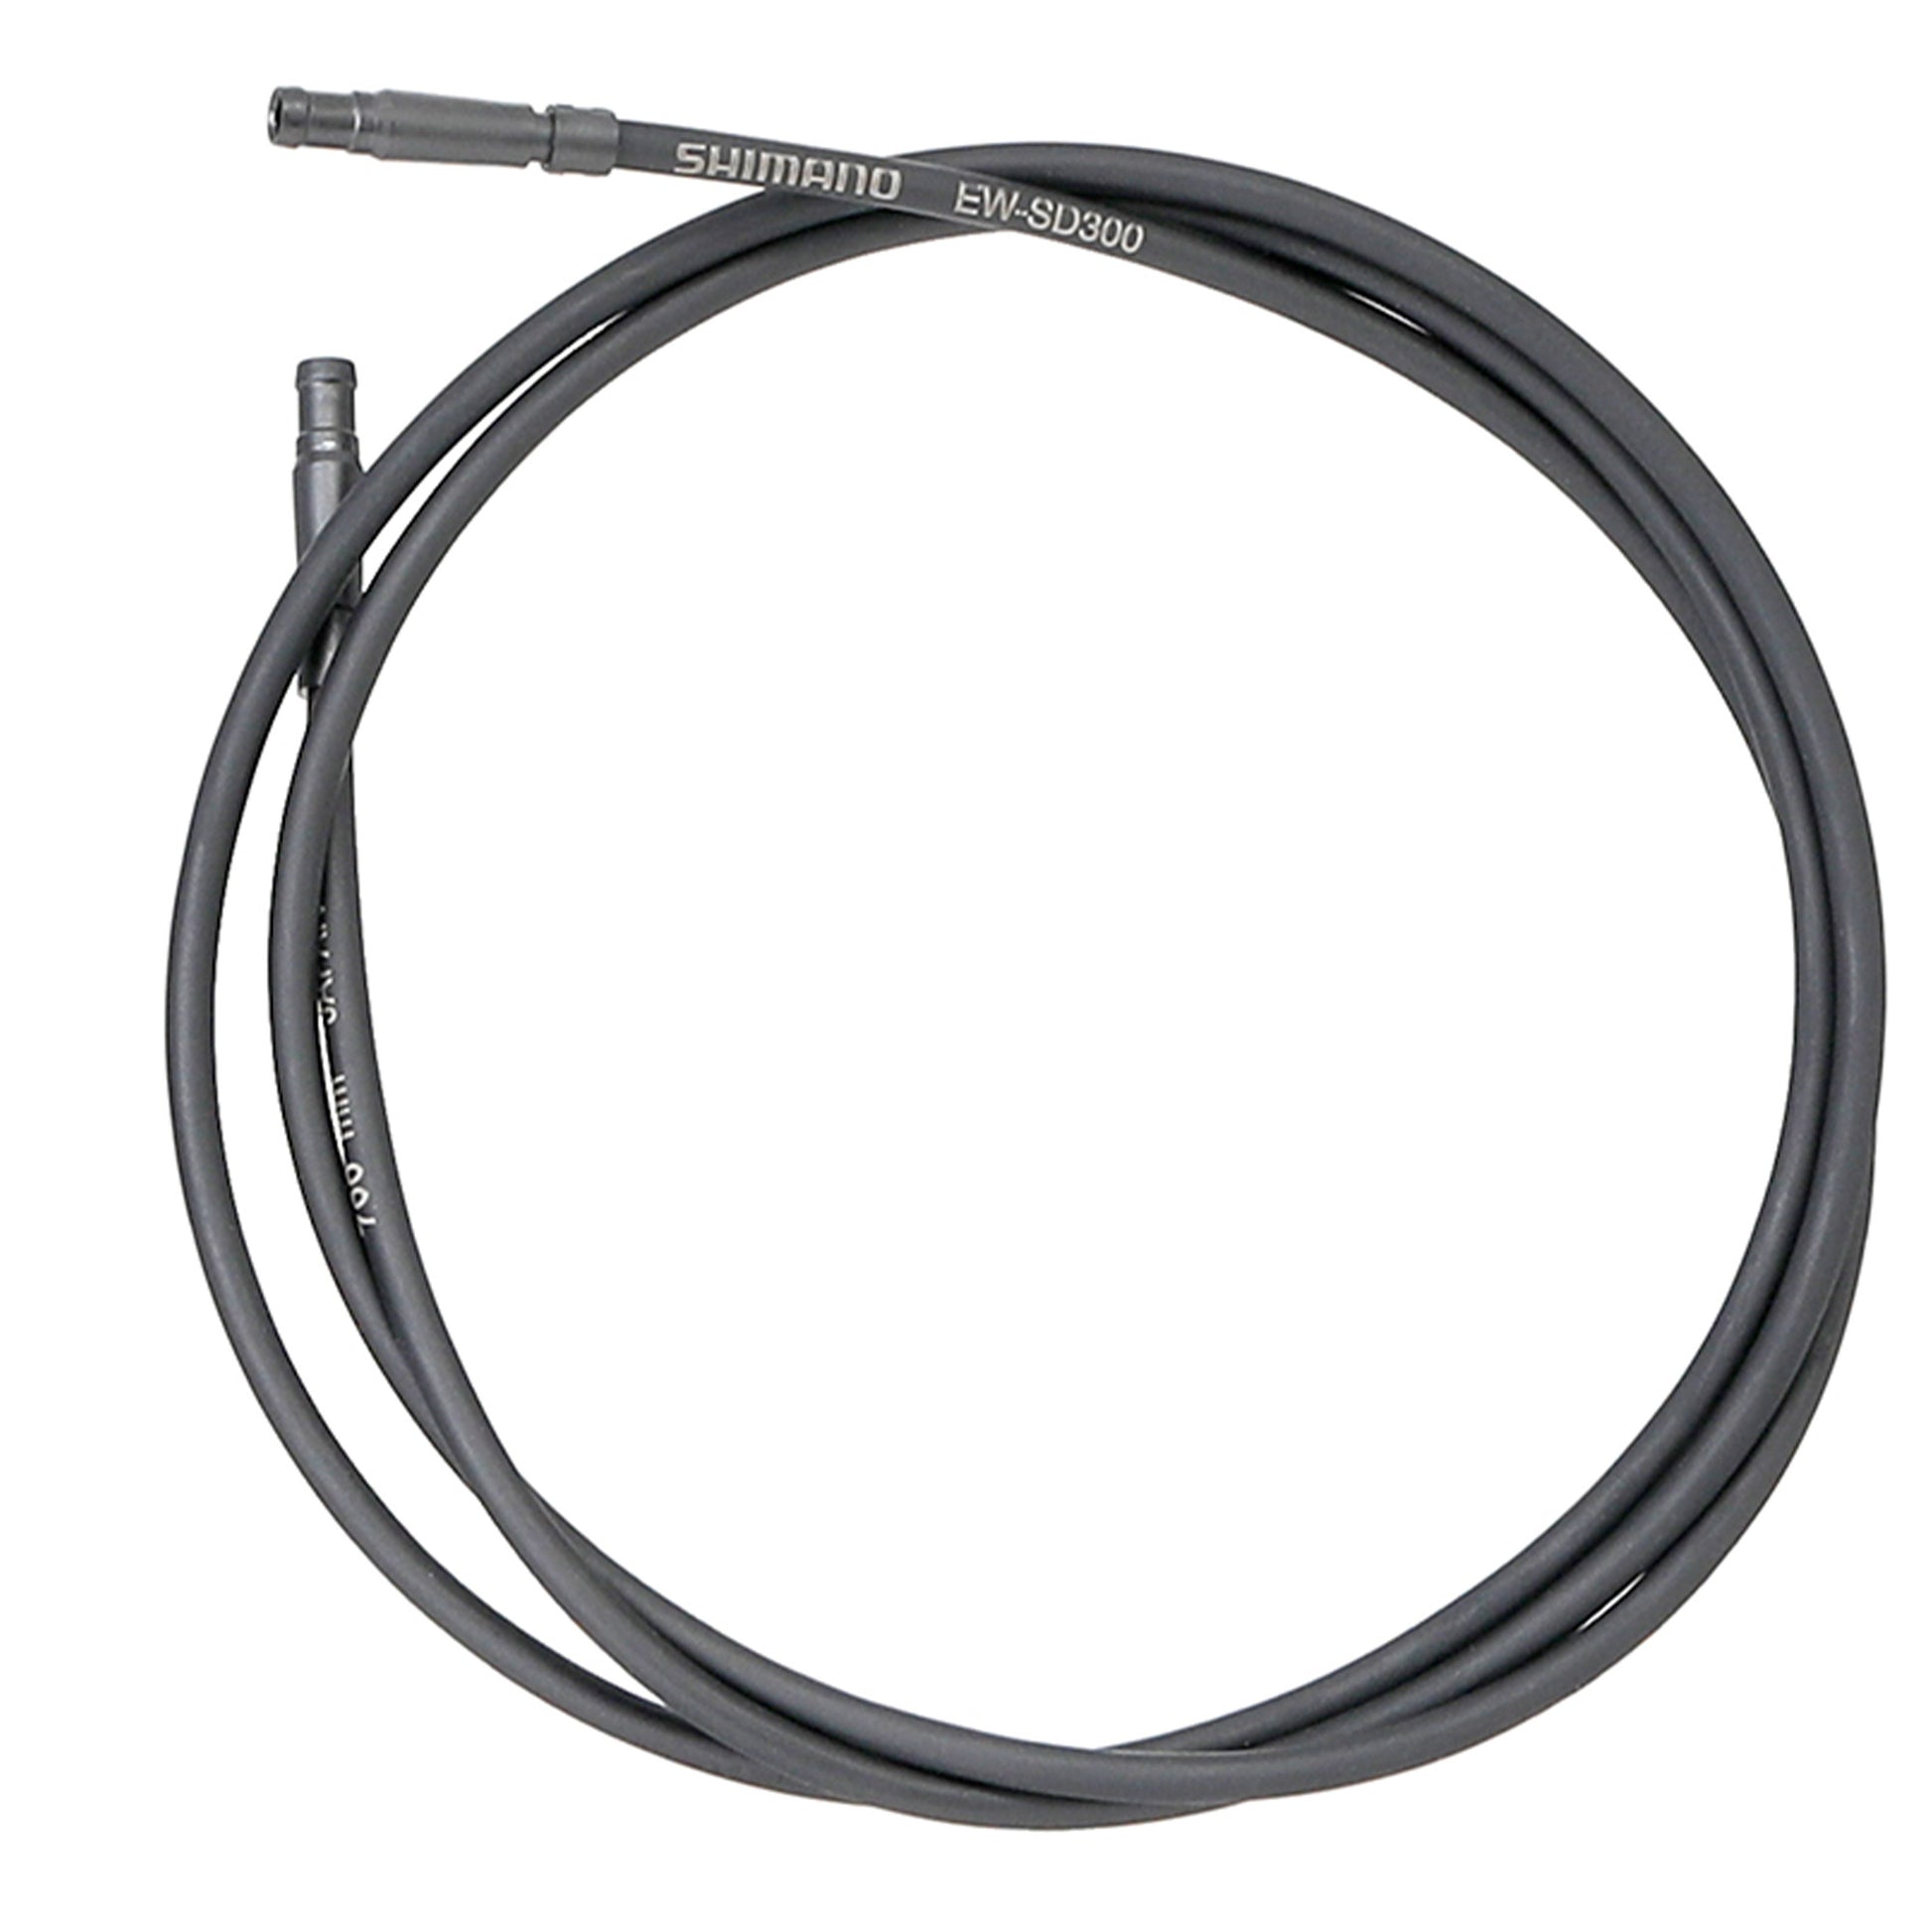 Shimano EW-SD300 Di2 Internal Electric Wire for Dura-Ace/Ultegra 700mm (front)